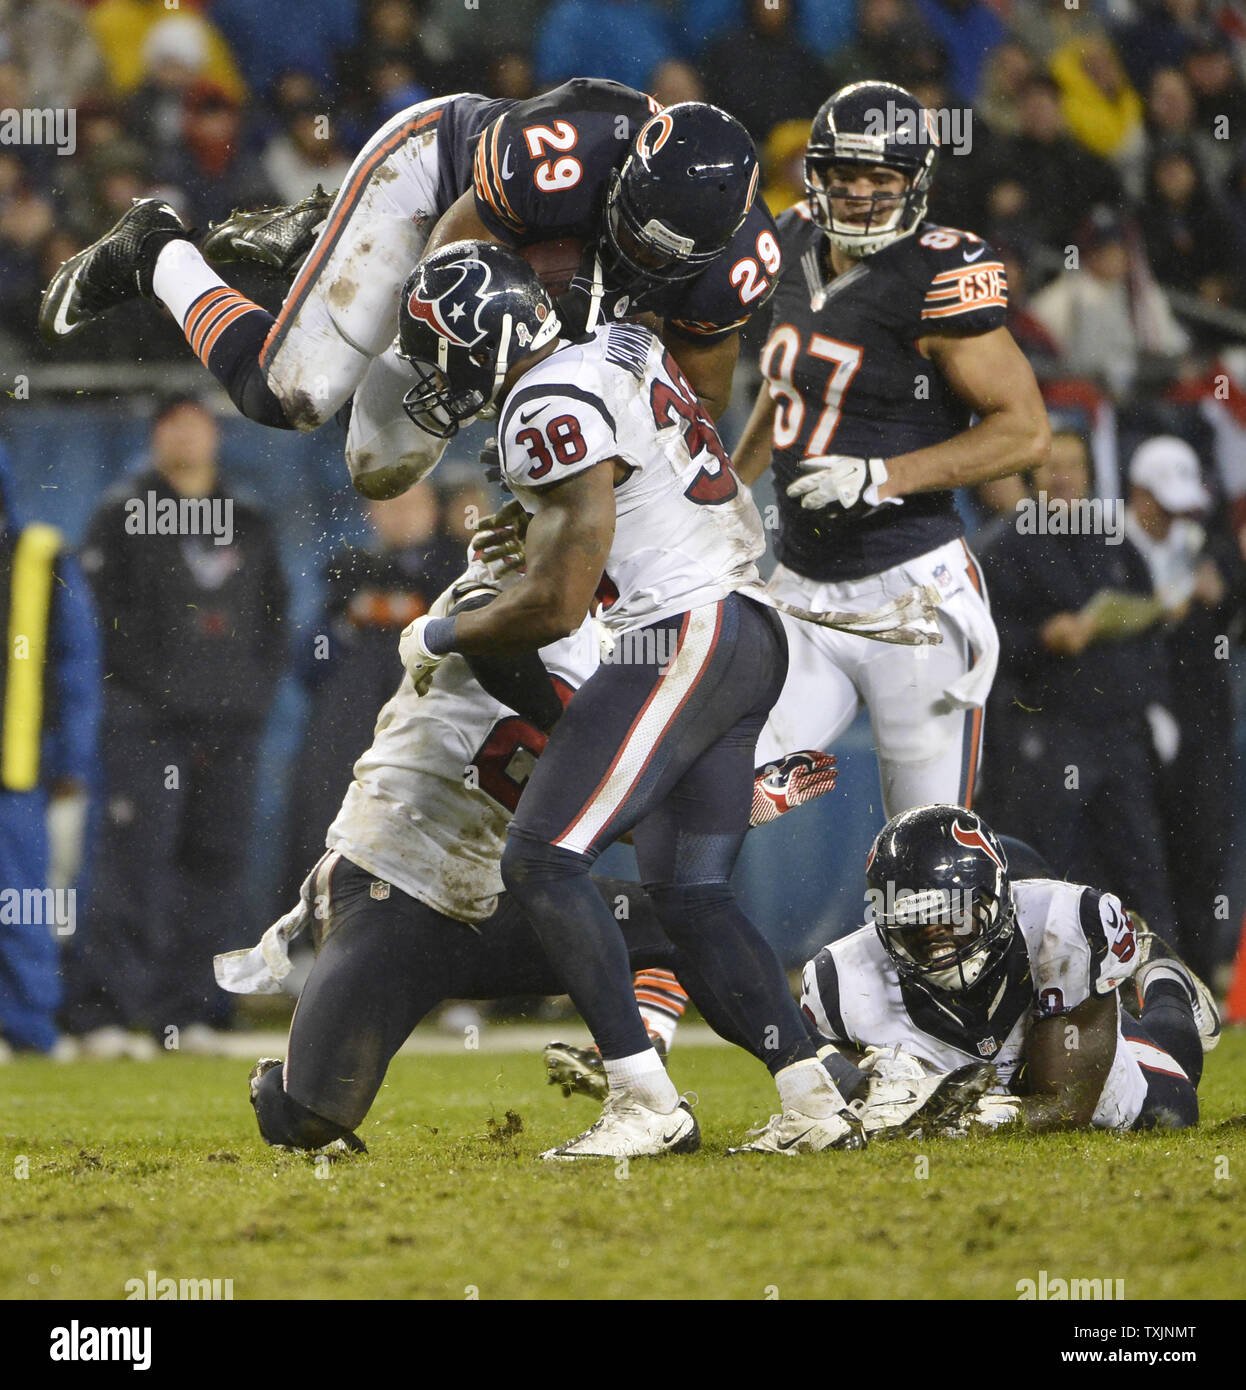 Chicago Bears running back Michael Bush (29) is upended by Houston Texans free safety Danieal Manning after a 20-yard run during the fourth quarter at Soldier Field on November 11, 2012 in Chicago. The Texans won 13-6.     UPI/Brian Kersey Stock Photo